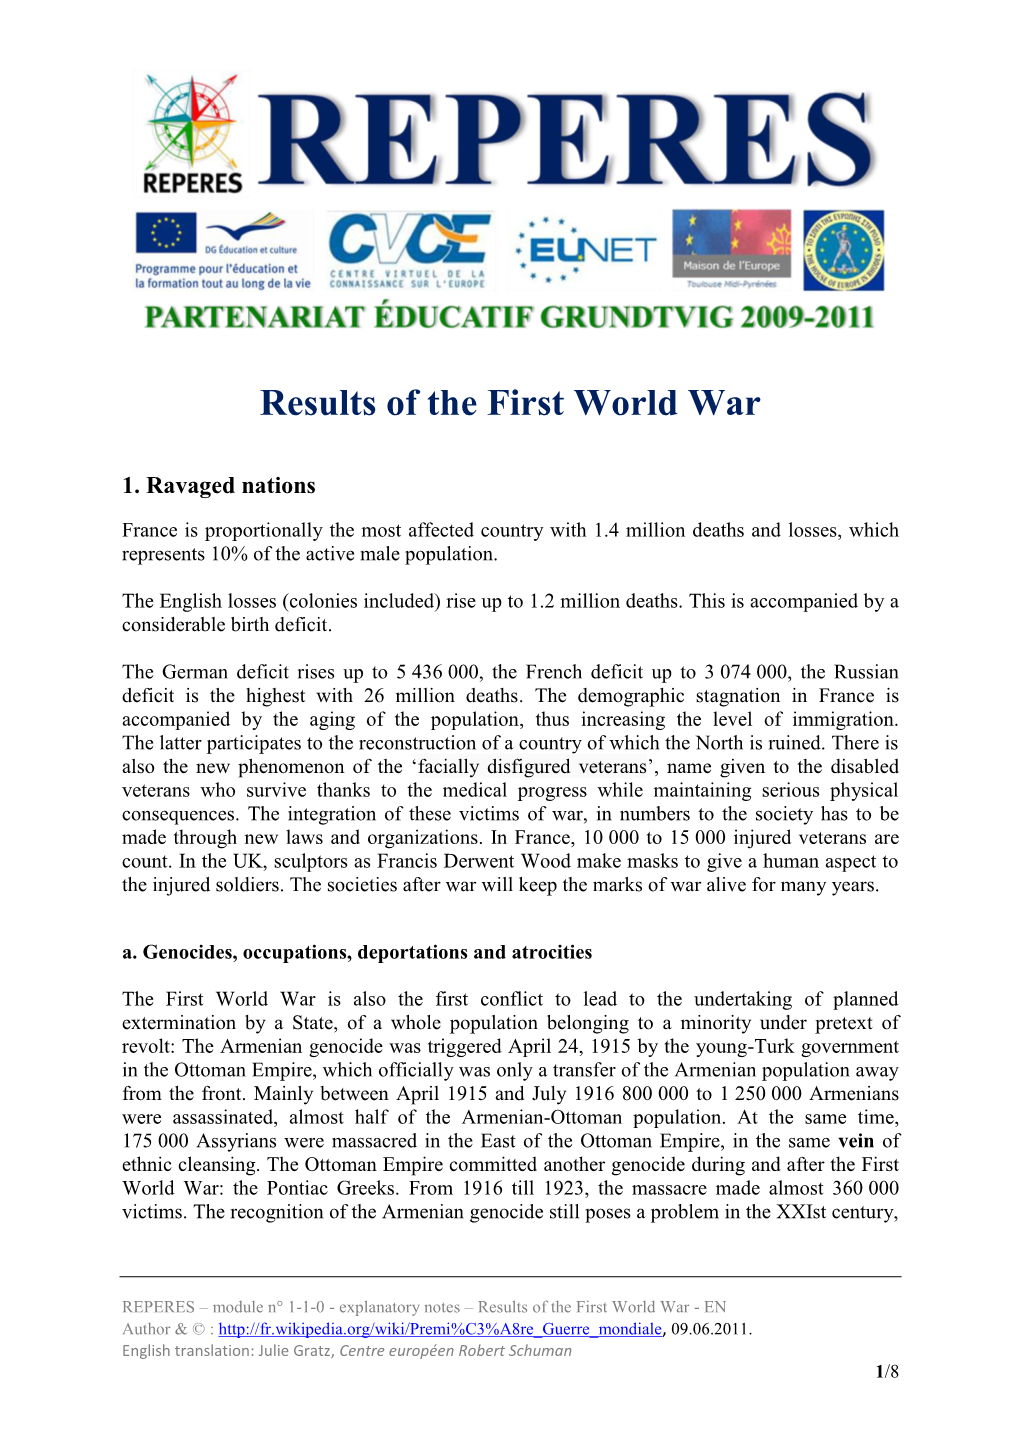 Results of the First World War